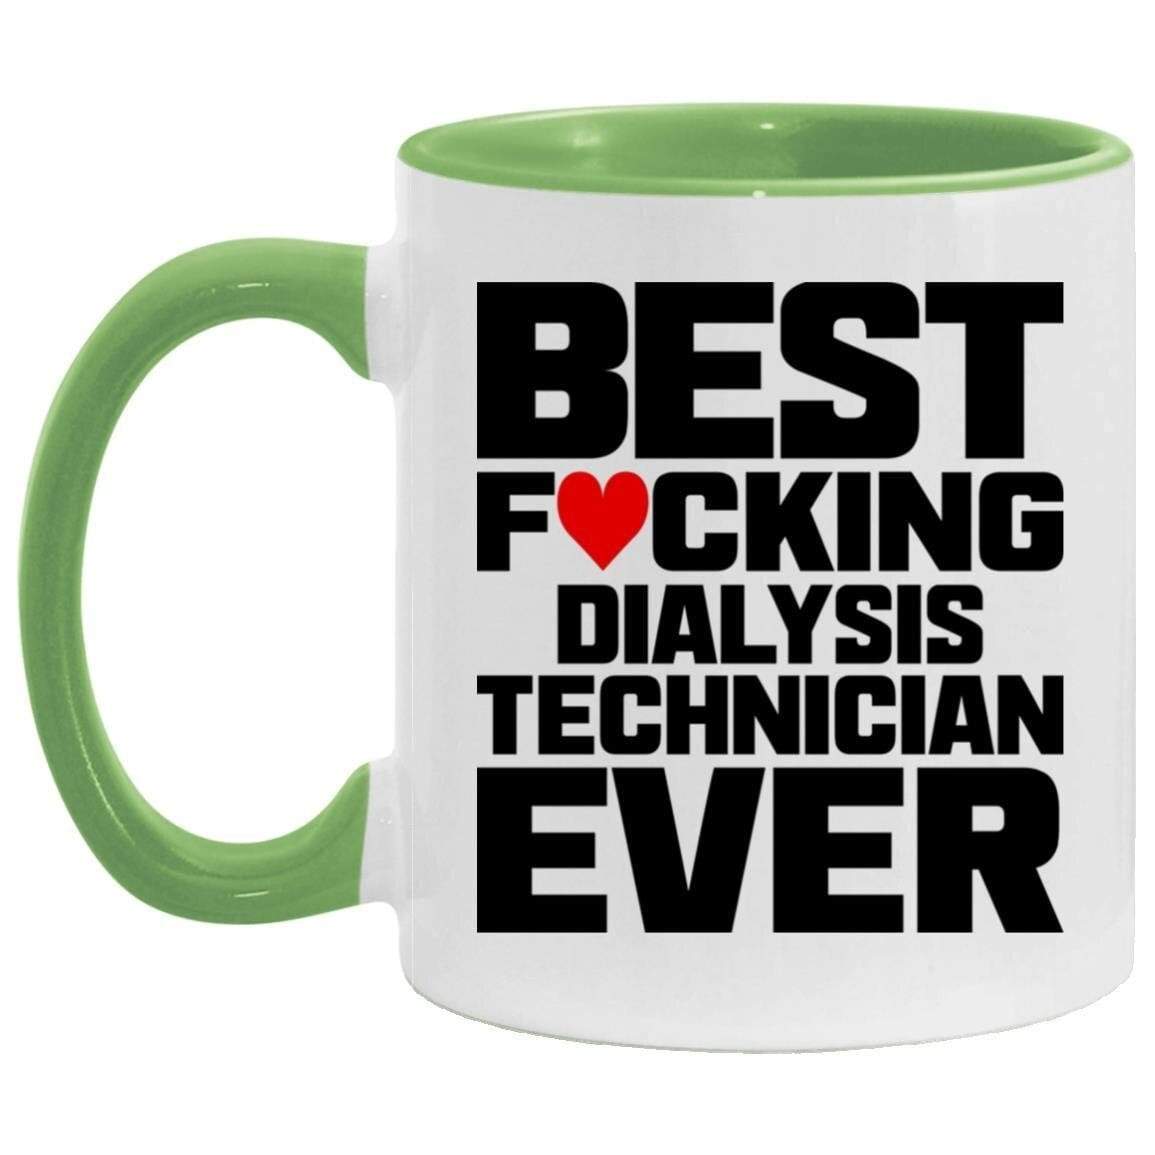 Best Fucking Dialysis Technician Ever (Coffee Mugs) Funny Gift for Nephrology Kidney Techs